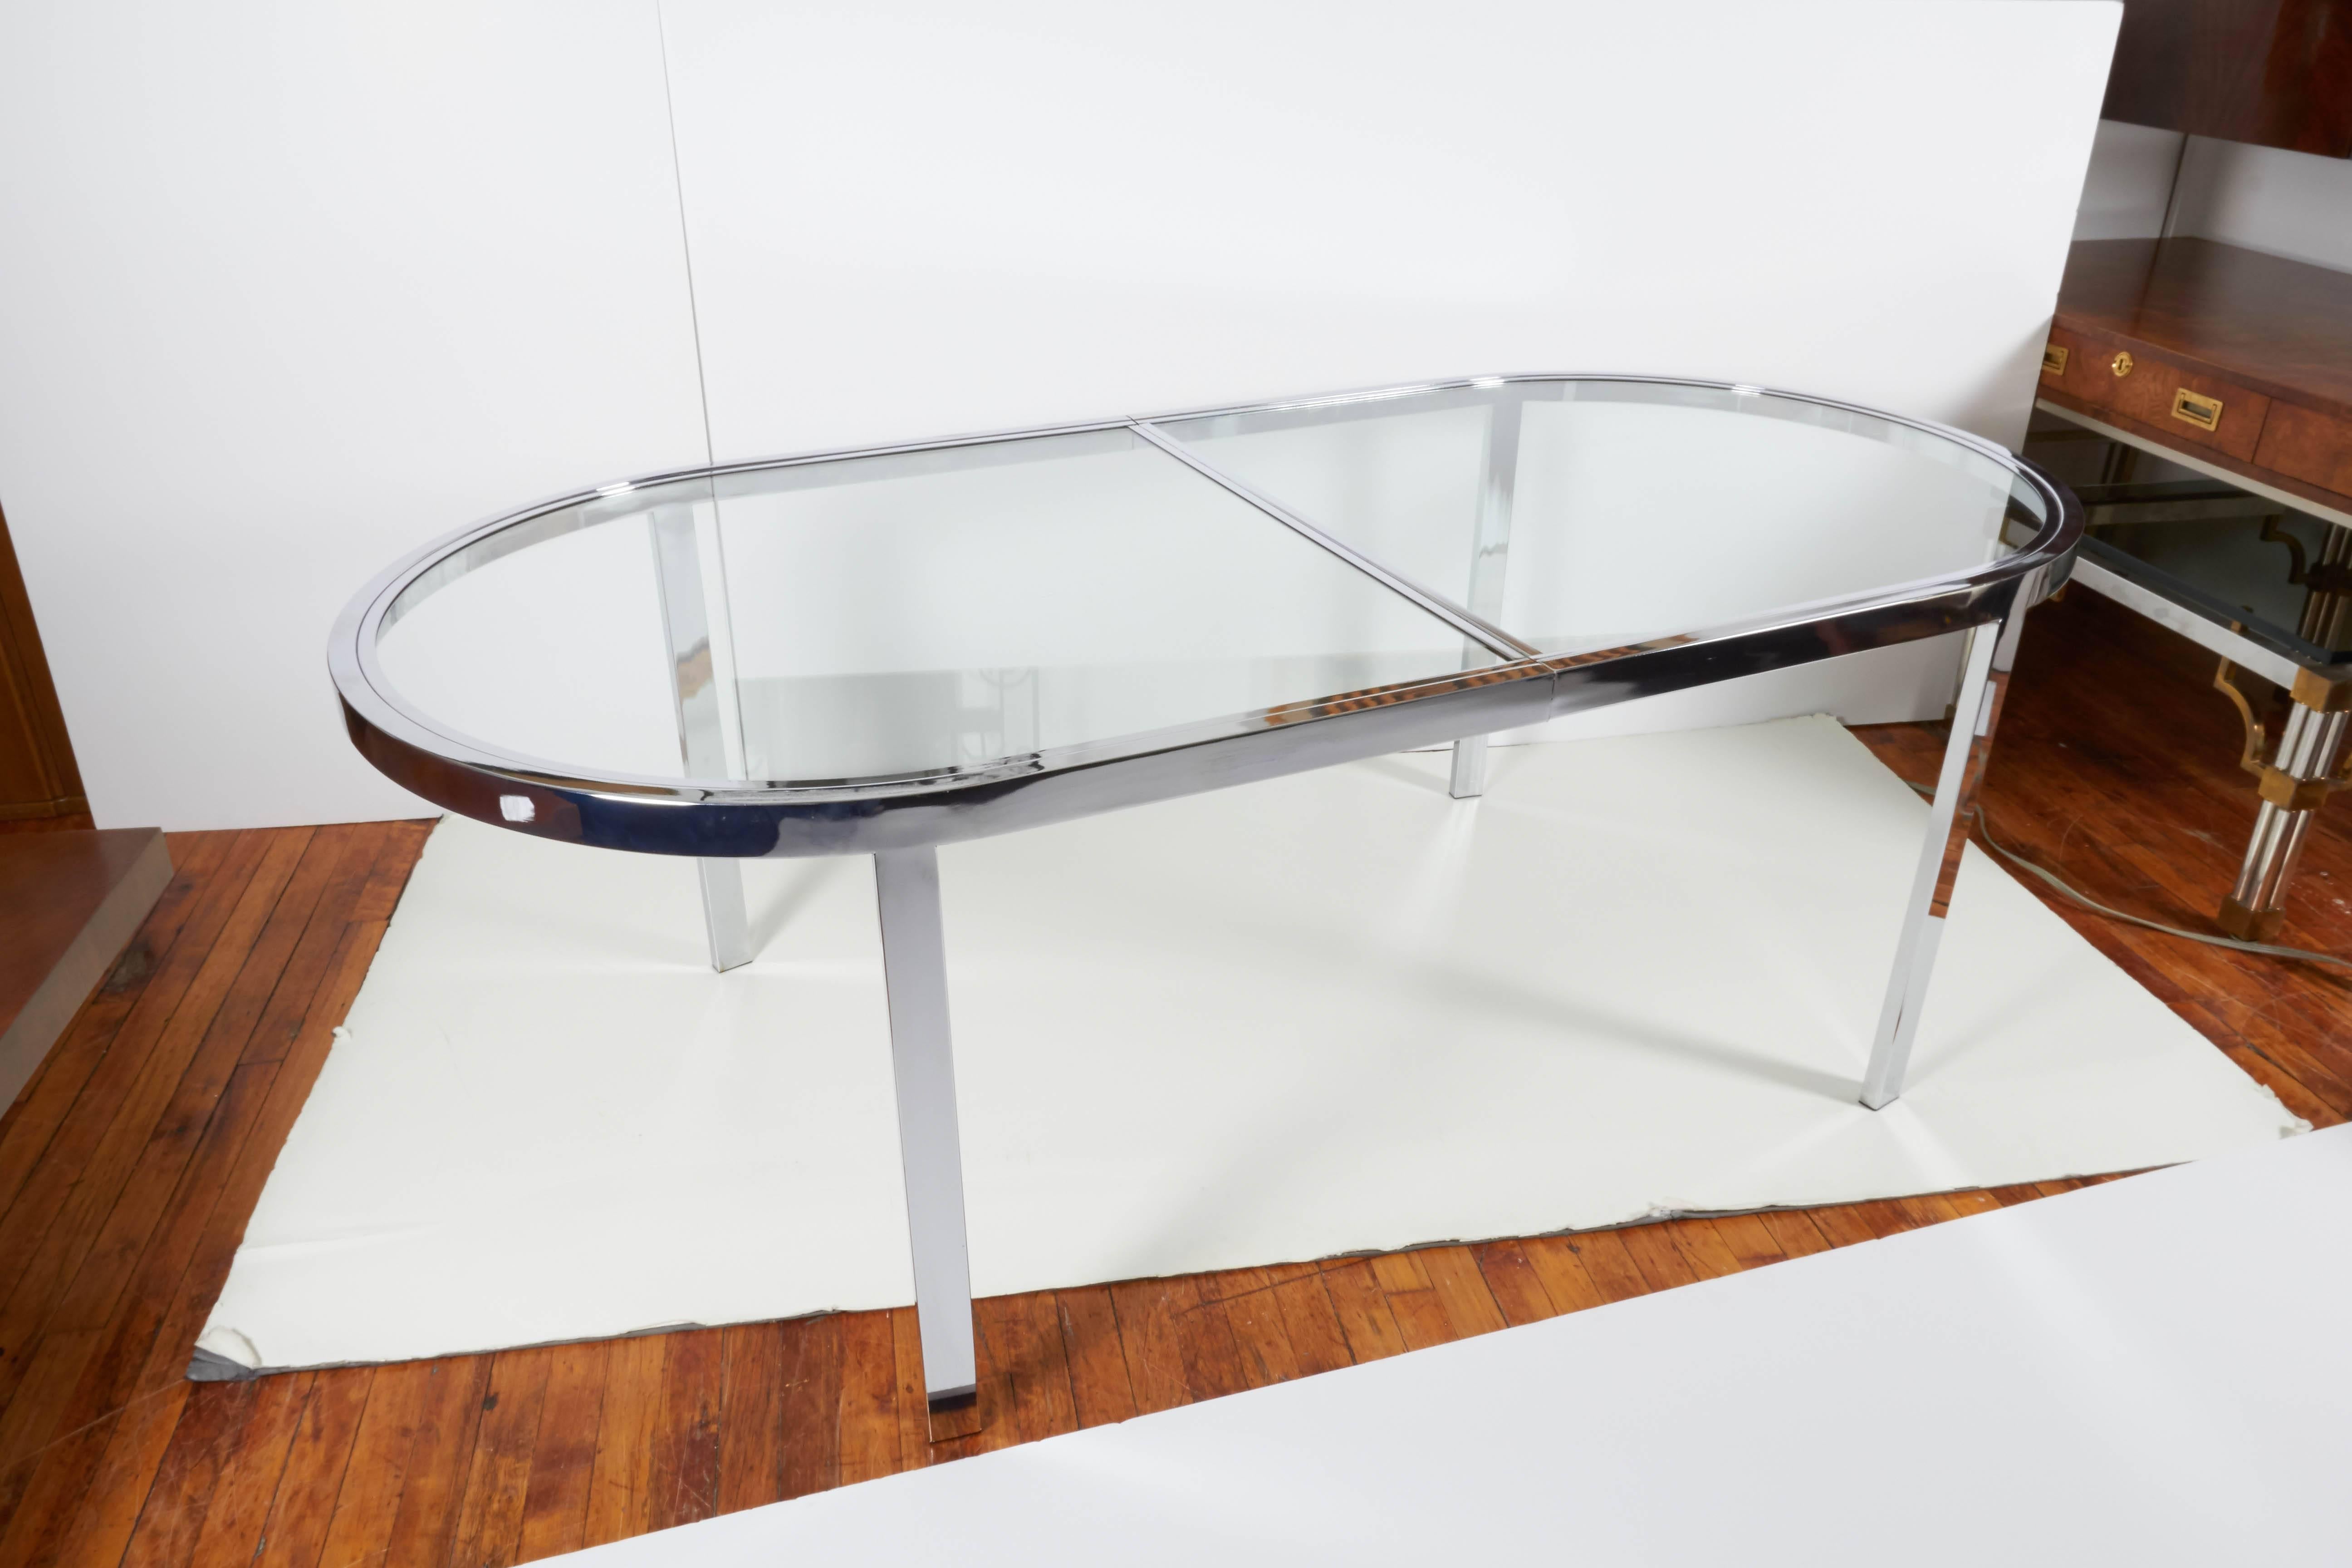 Late 20th Century Milo Baughman Glass Top Dining Table in Chrome